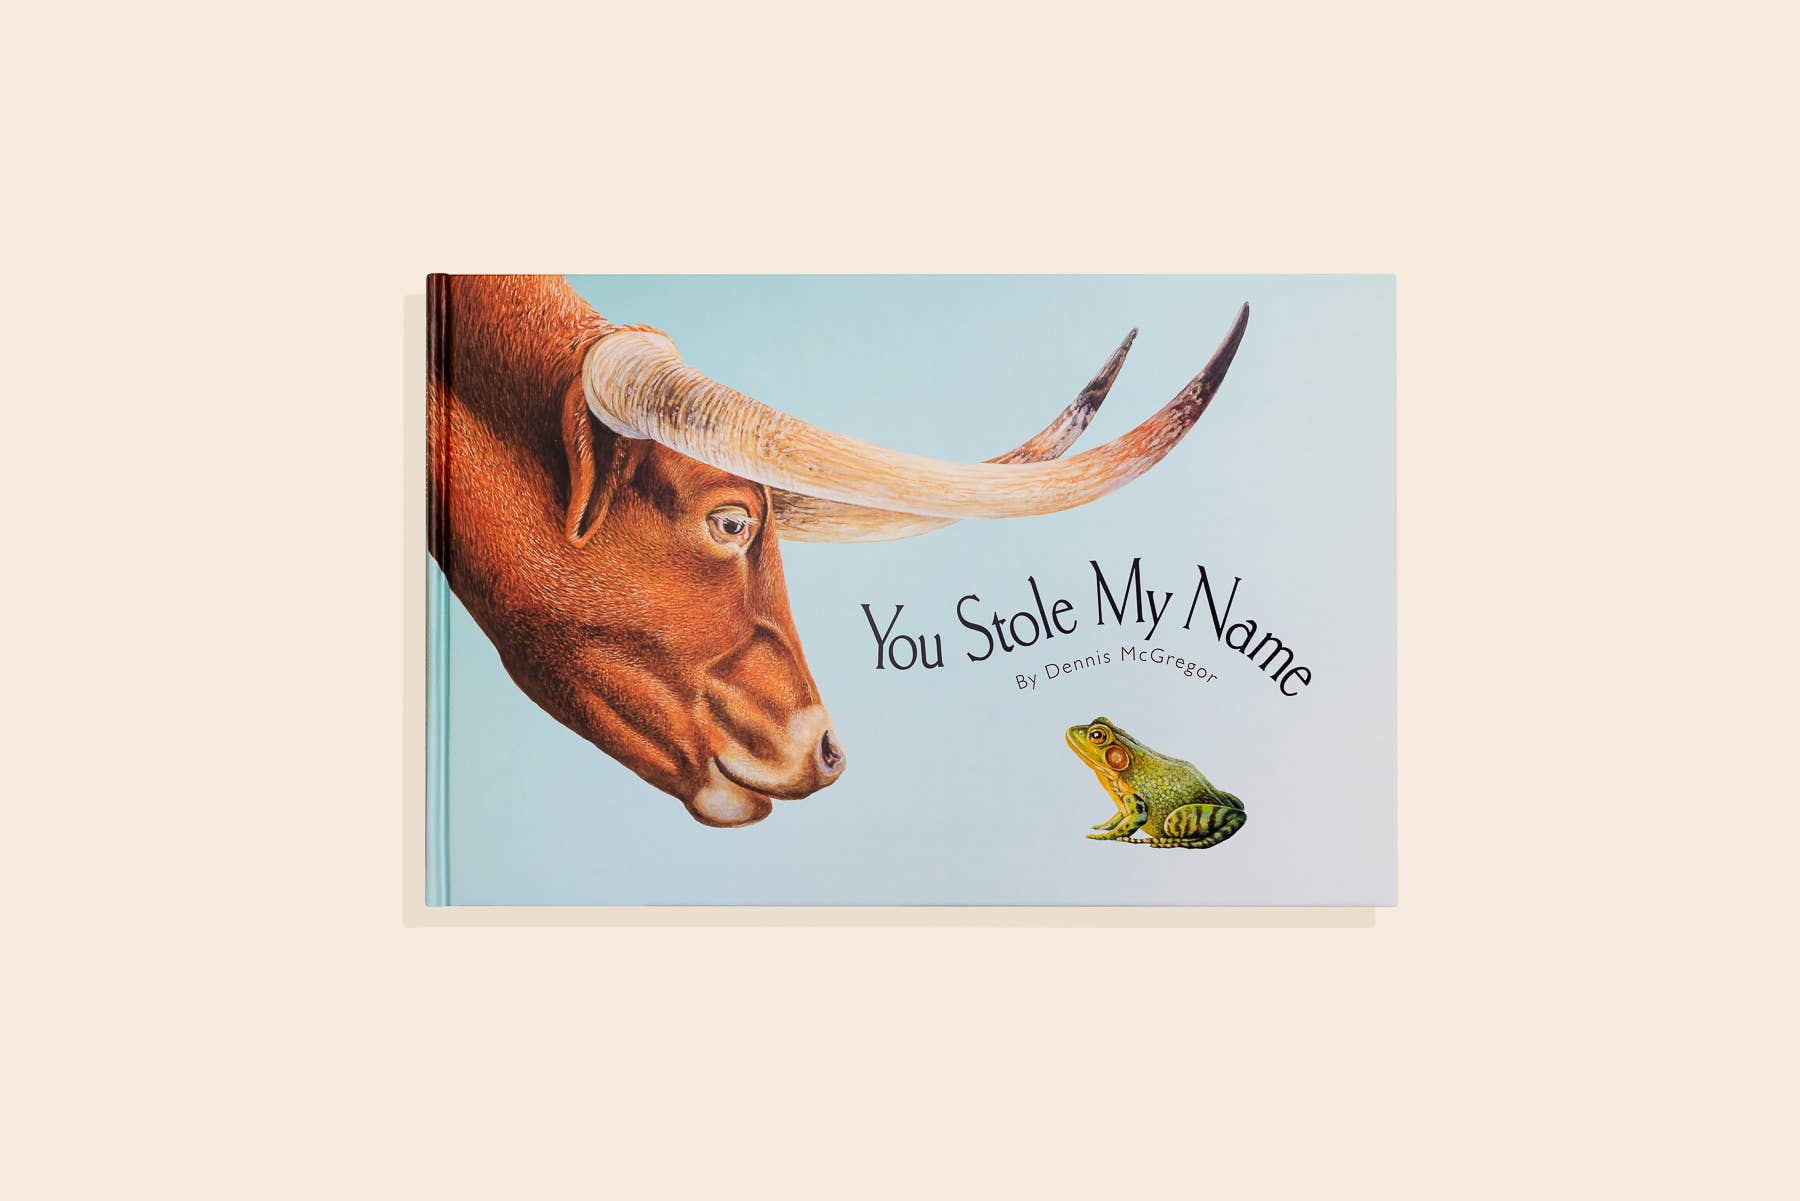 A delightful picture book, "You Stole My Name", with charming illustrations featuring a lovable frog and a gentle ox, taking young readers on an enchanting journey through the animal kingdom.